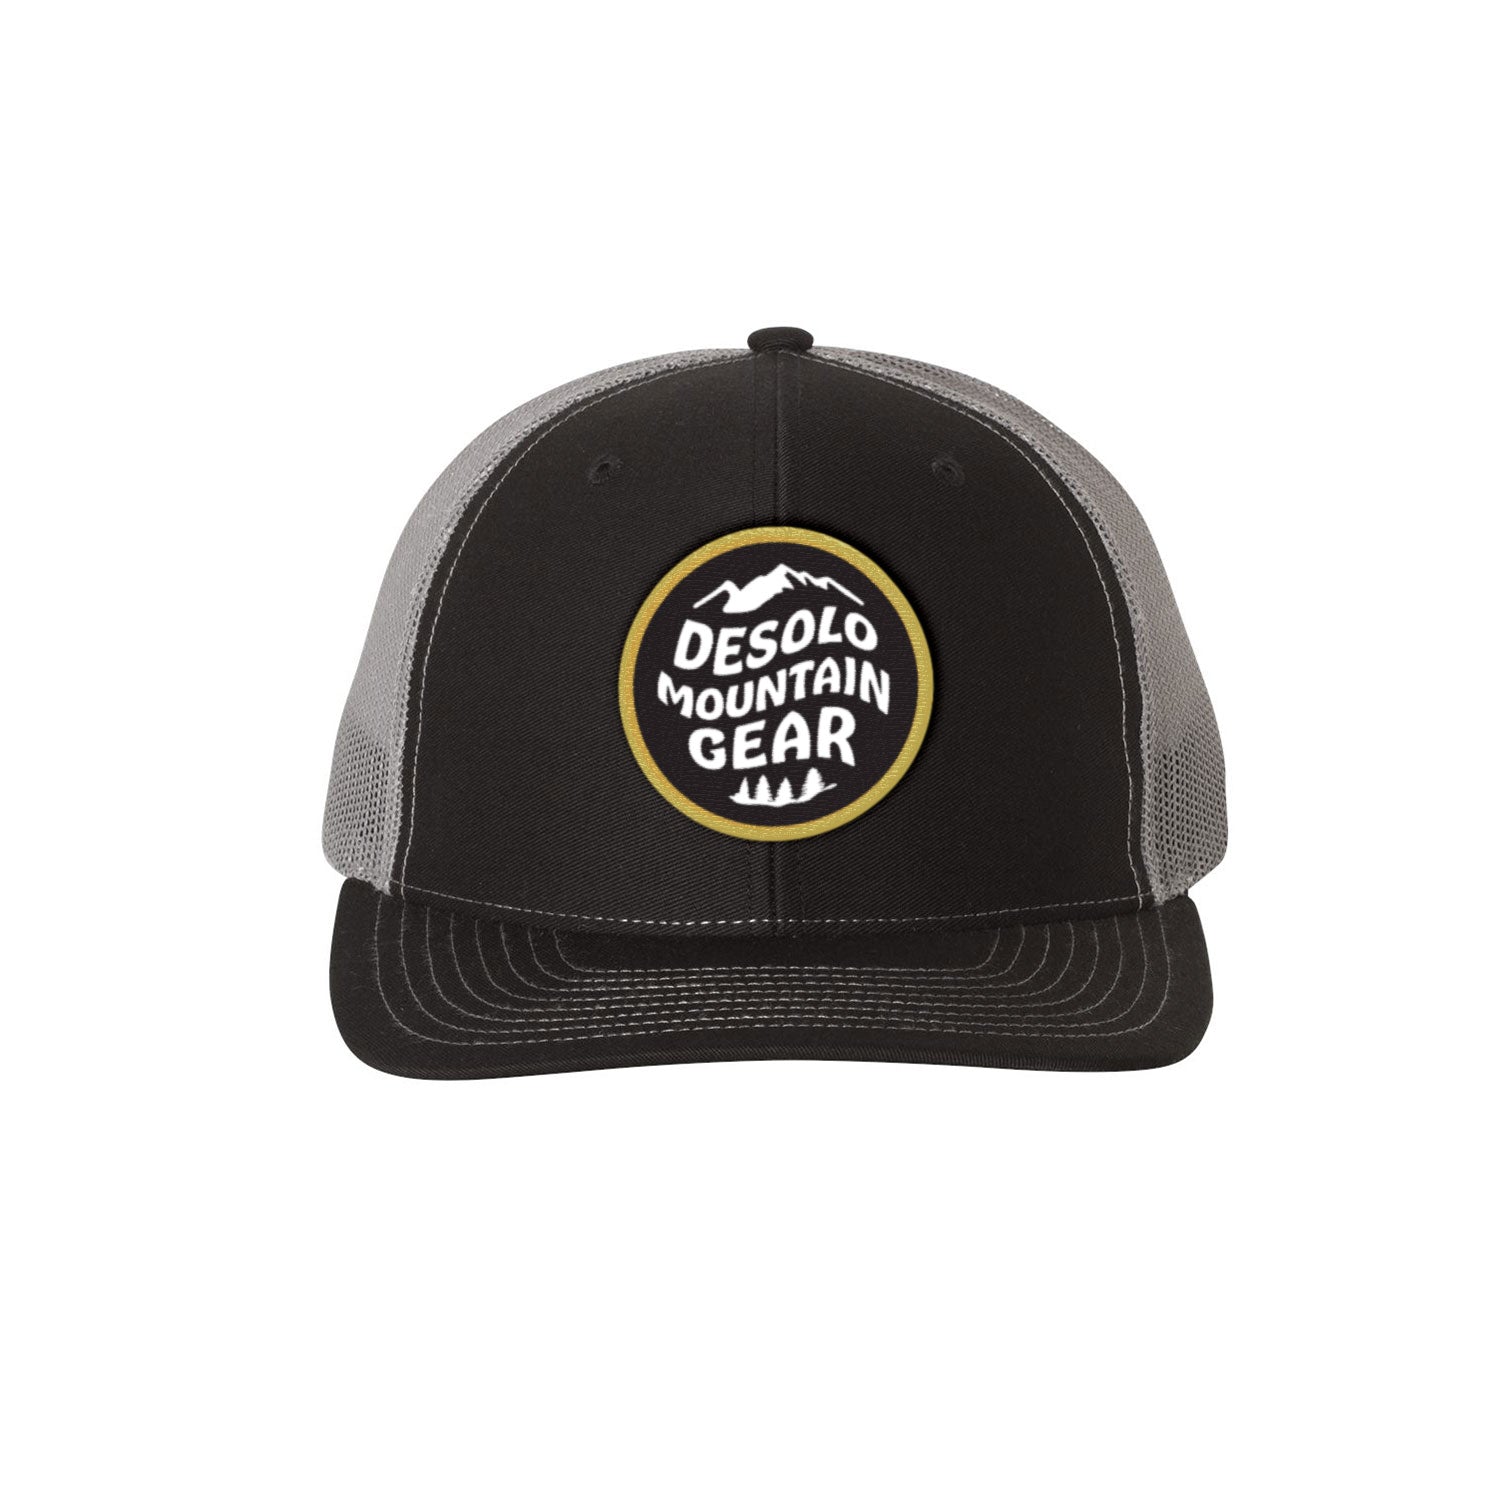 Psych Crest Hat (Trucker Style) - Black / Charcoal